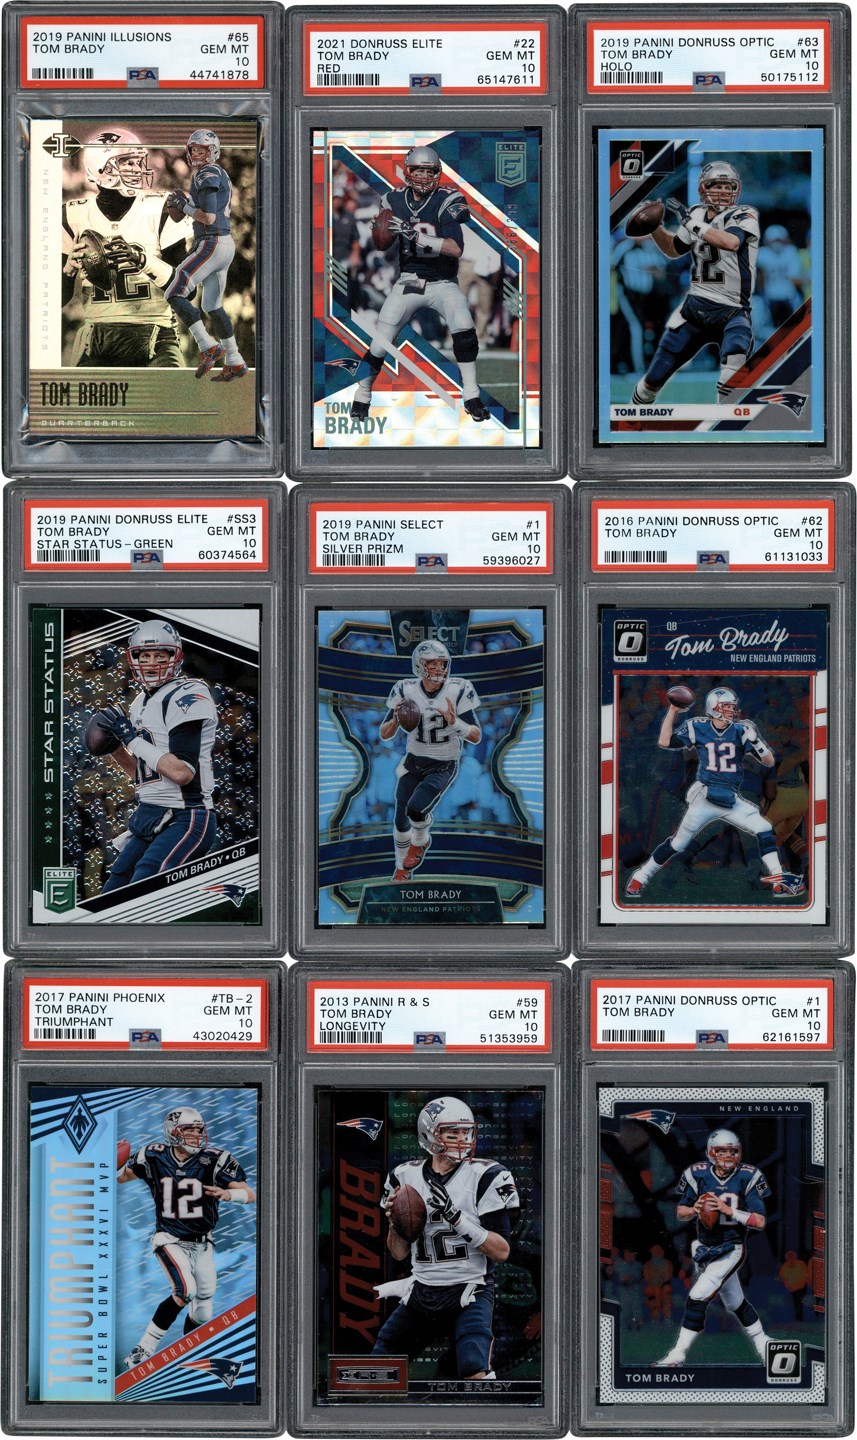 2012-2021 Panini Tom Brady PSA GEM MINT 10 Card Collection with Select Silver Prizm and Inserts (32)